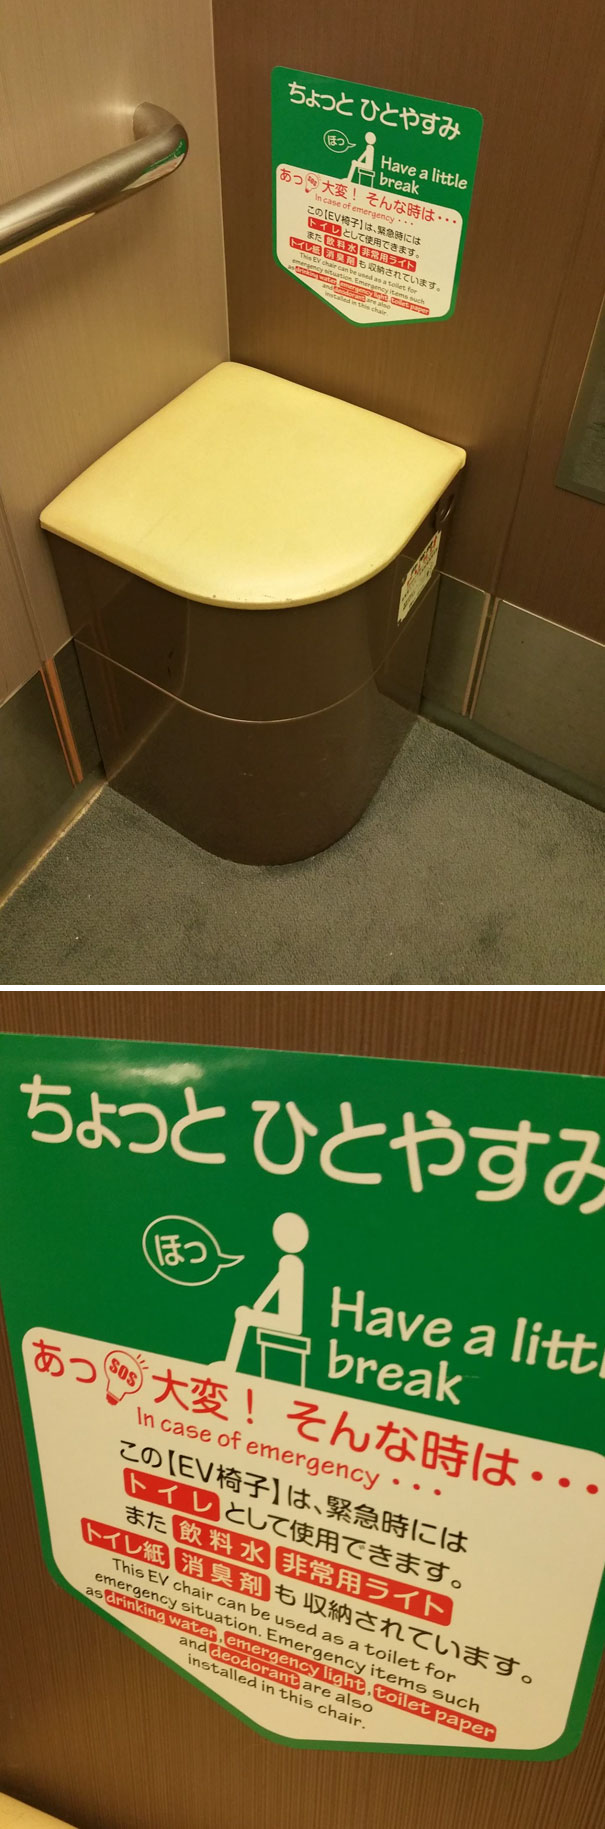 This Lift In Japan Has A Seat That Can Be Used As A Toilet In An Emergency